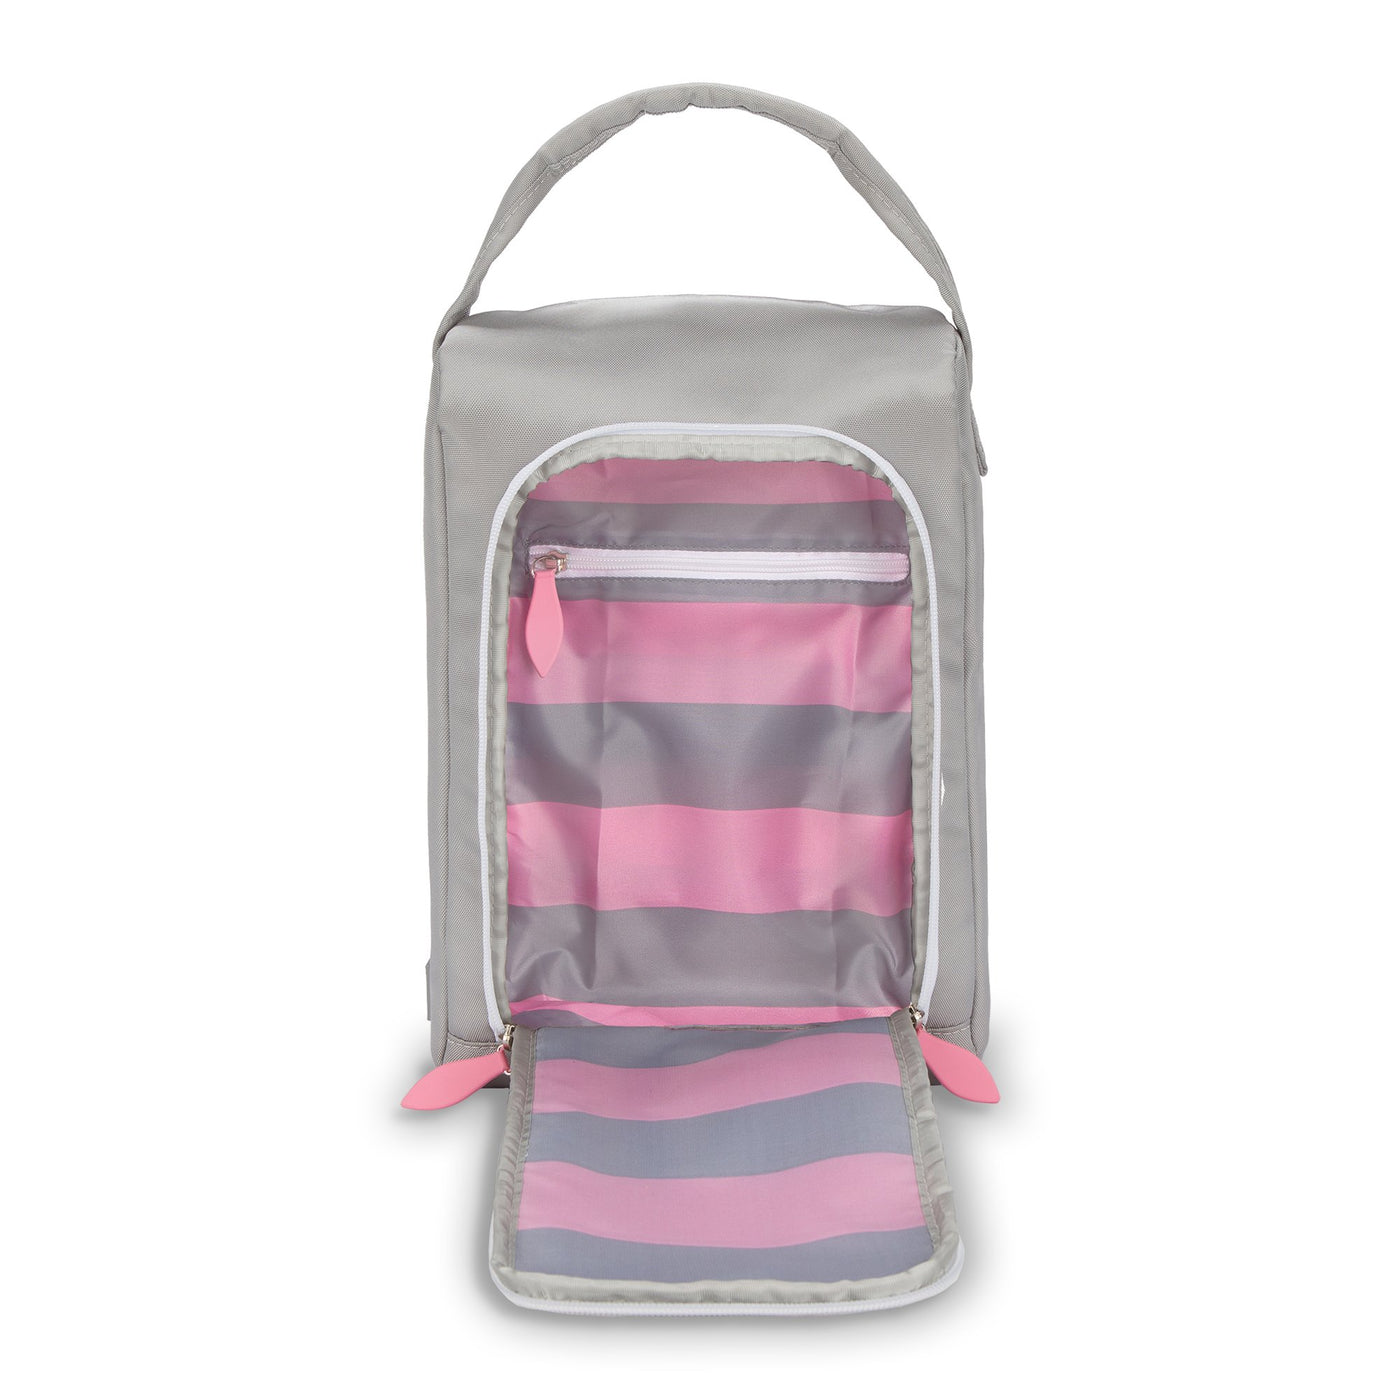 inside view of grey shoe bag with pink zippers. interior is pink and grey striped